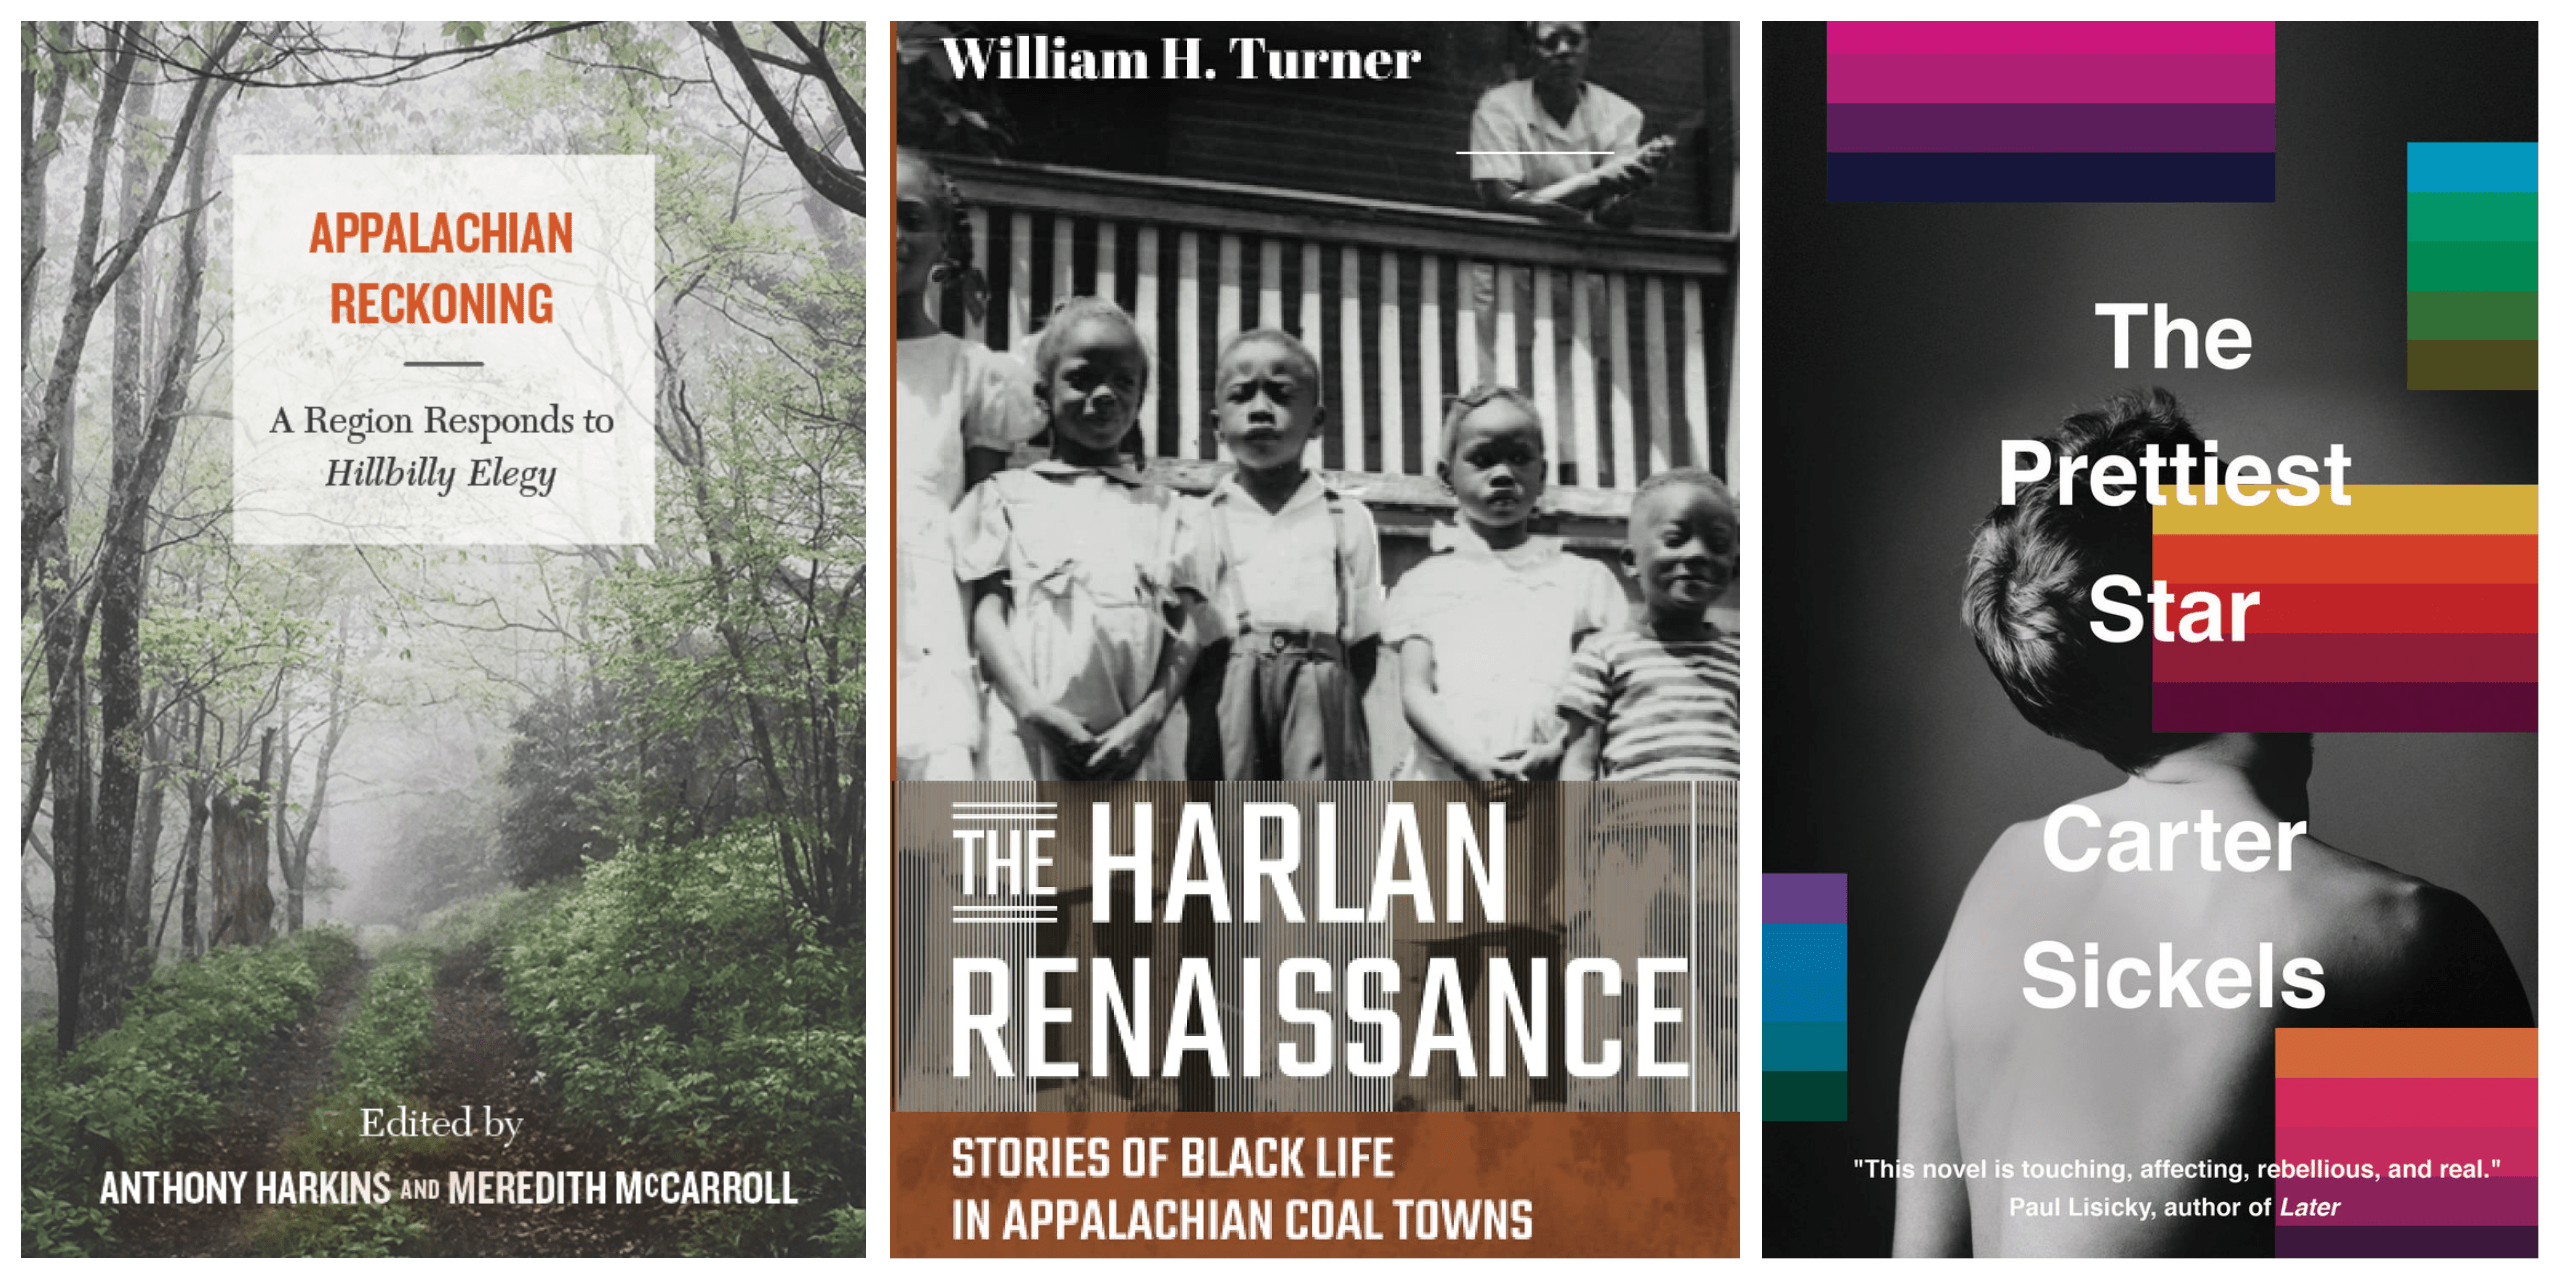 WBUR arts and culture fellow Lauren Williams recommends three books about the history of the Appalachia region. (Courtesy of the book publishers)